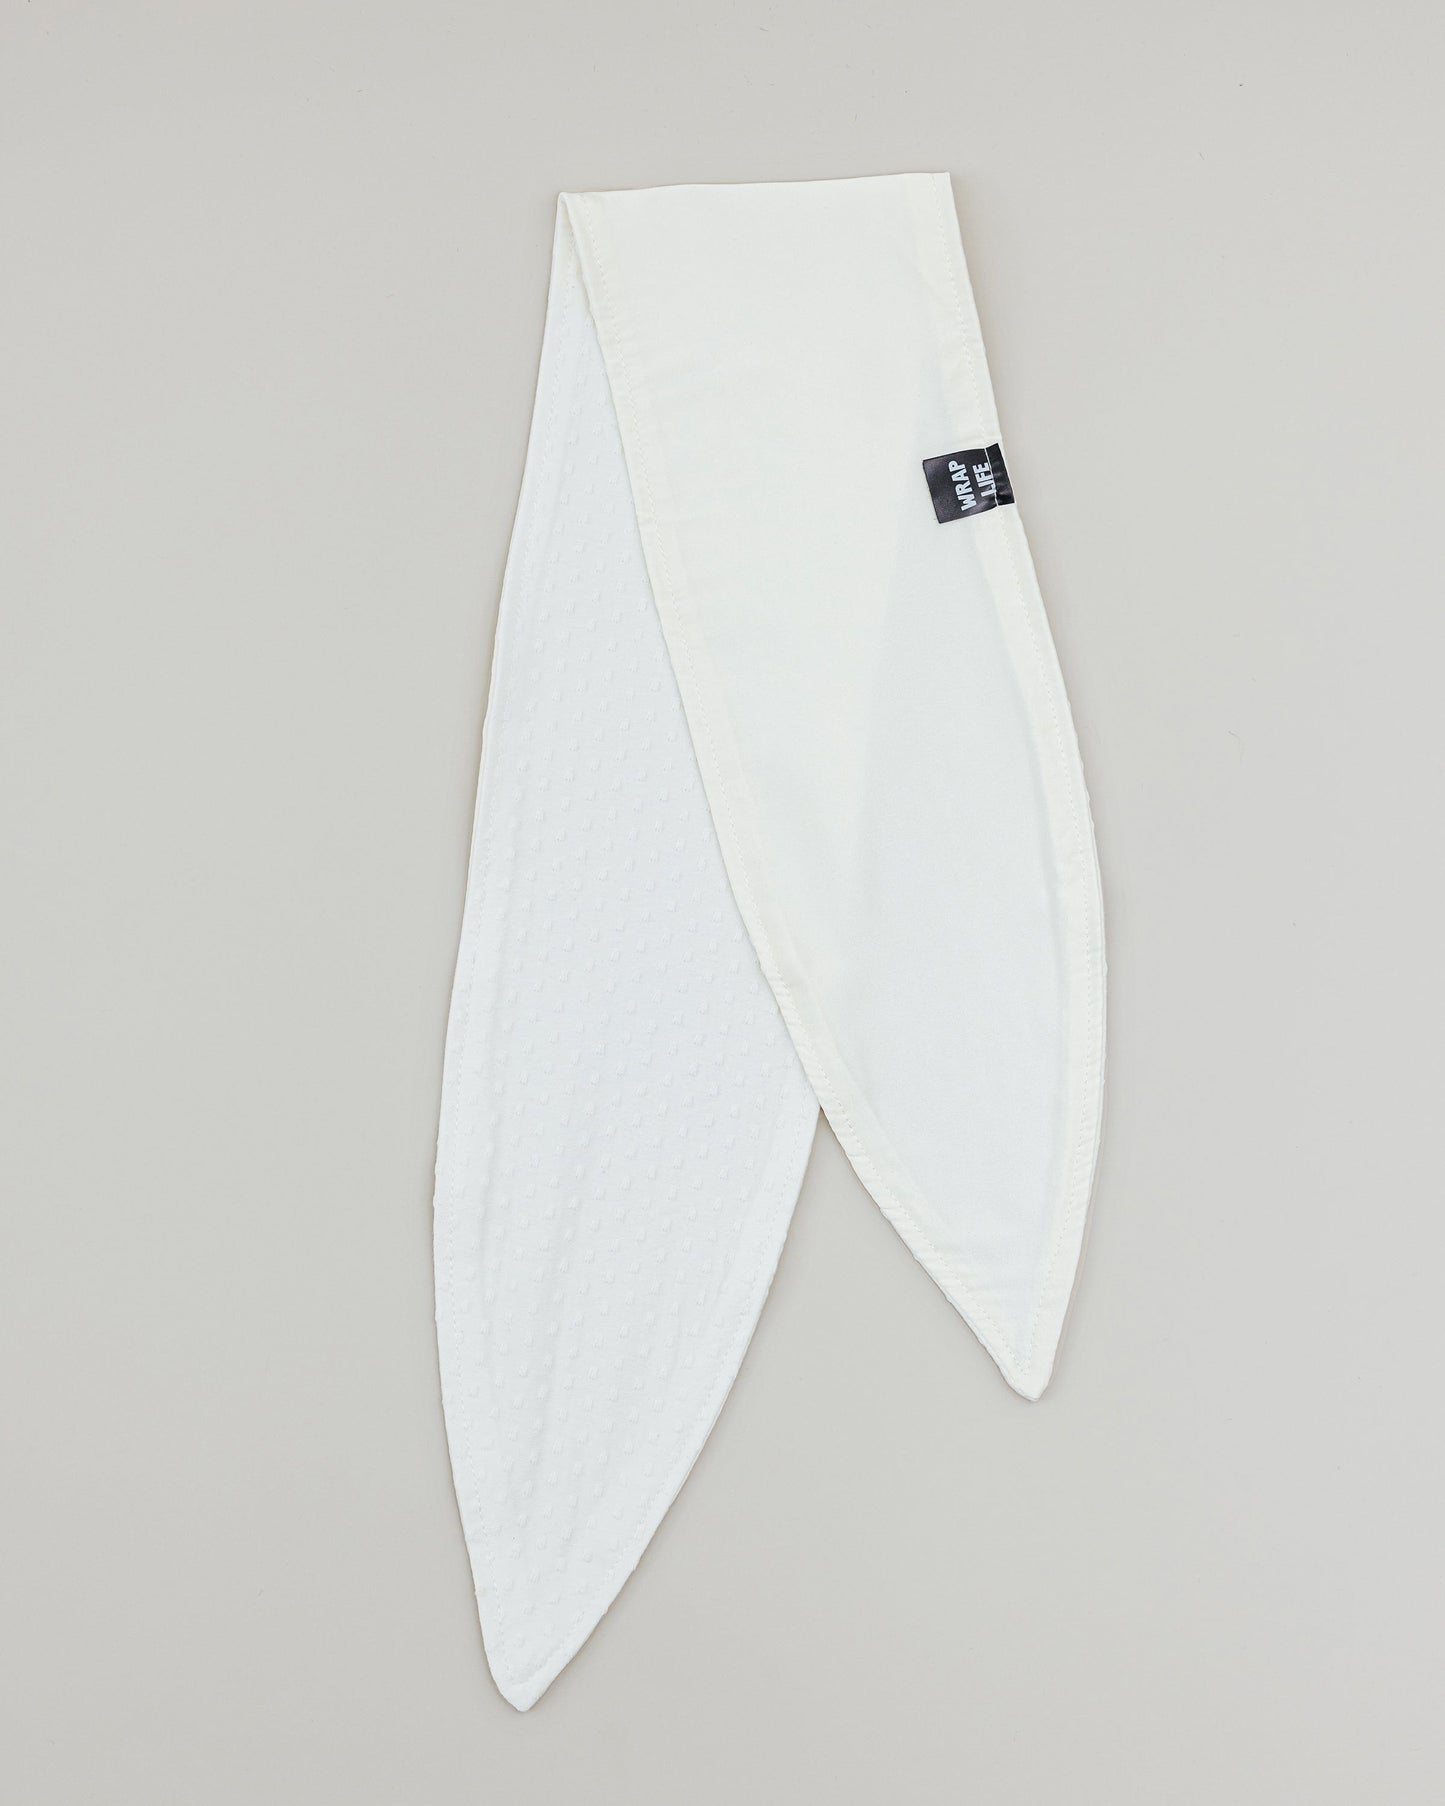 The Wrap Life Dainty Satin Lined Bandie in Tusk White Bandie